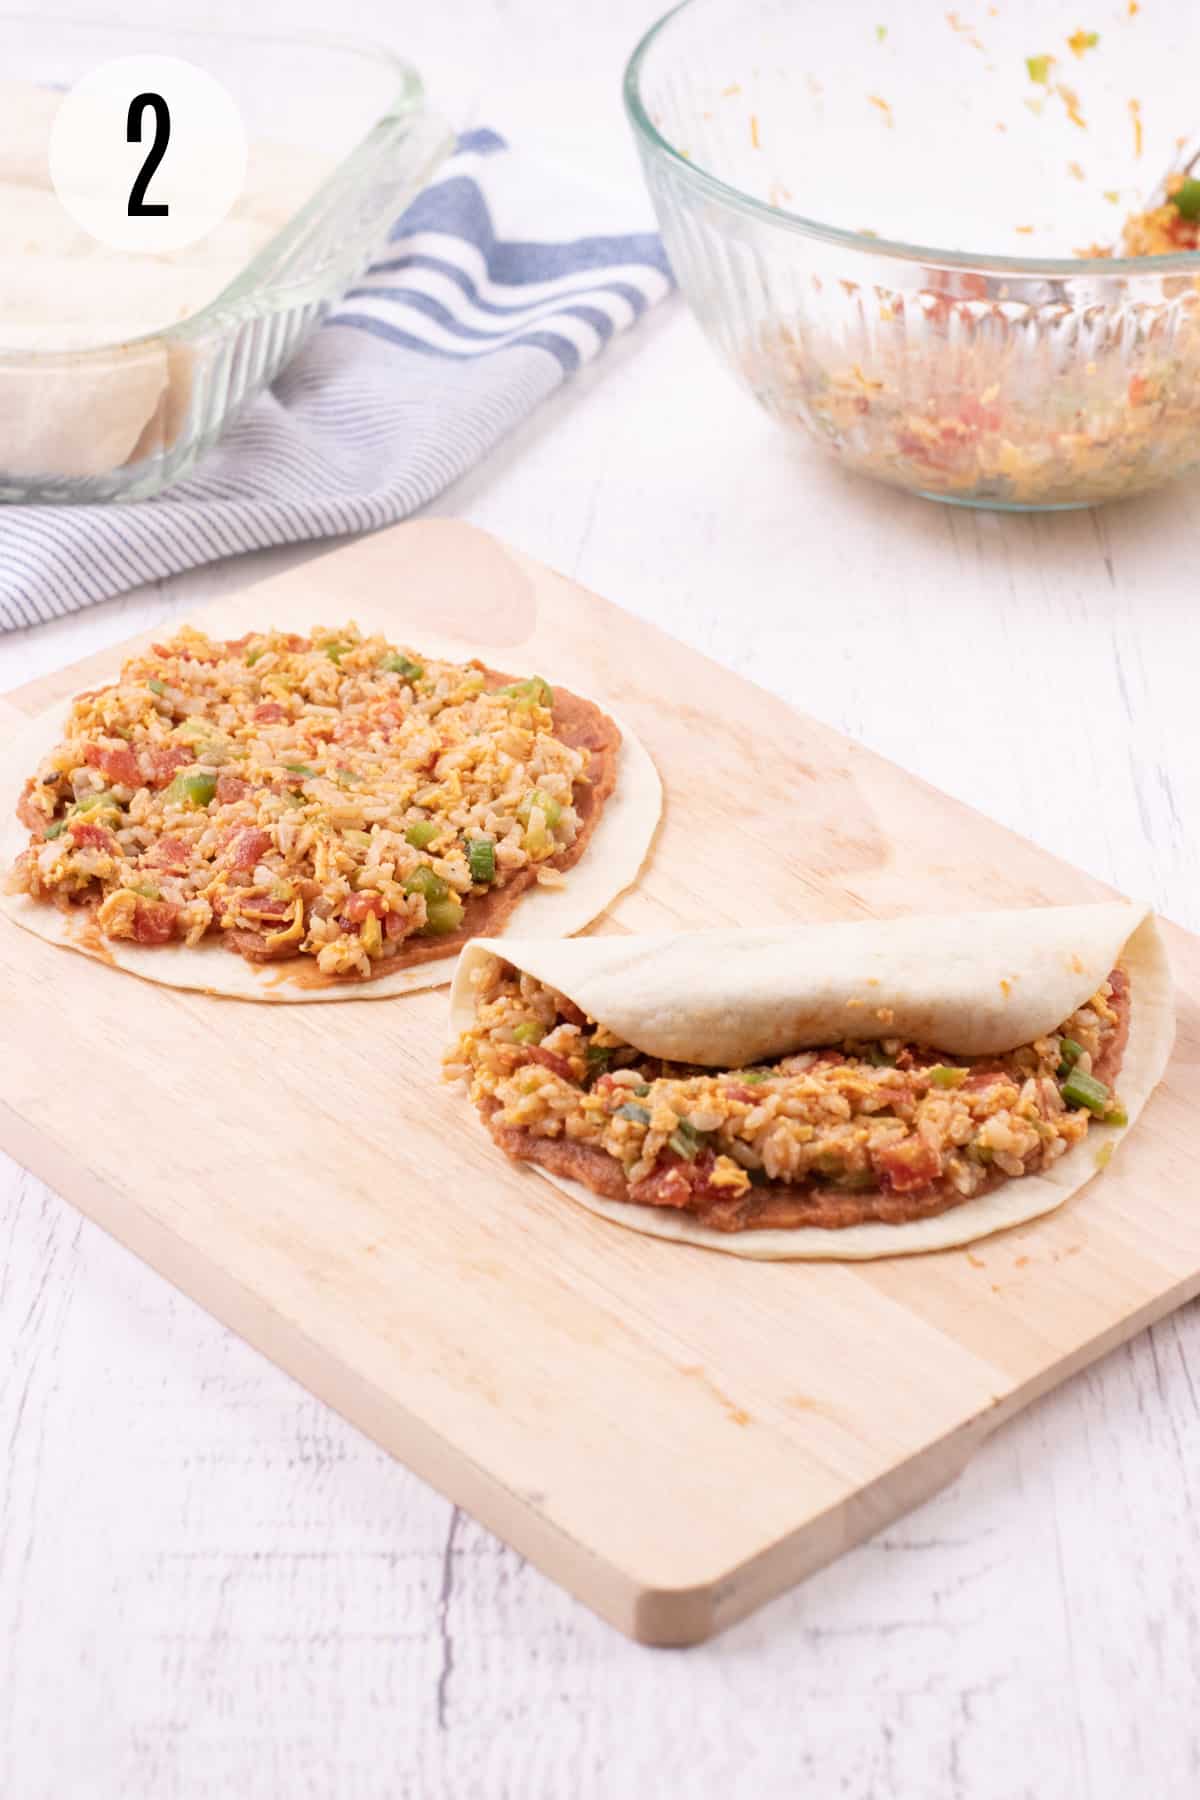 Wooden cutting board with tortillas filled with burrito bite filling and partially rolled up with pan of rolled tortillas and glass bowl of mixture in upper background. 